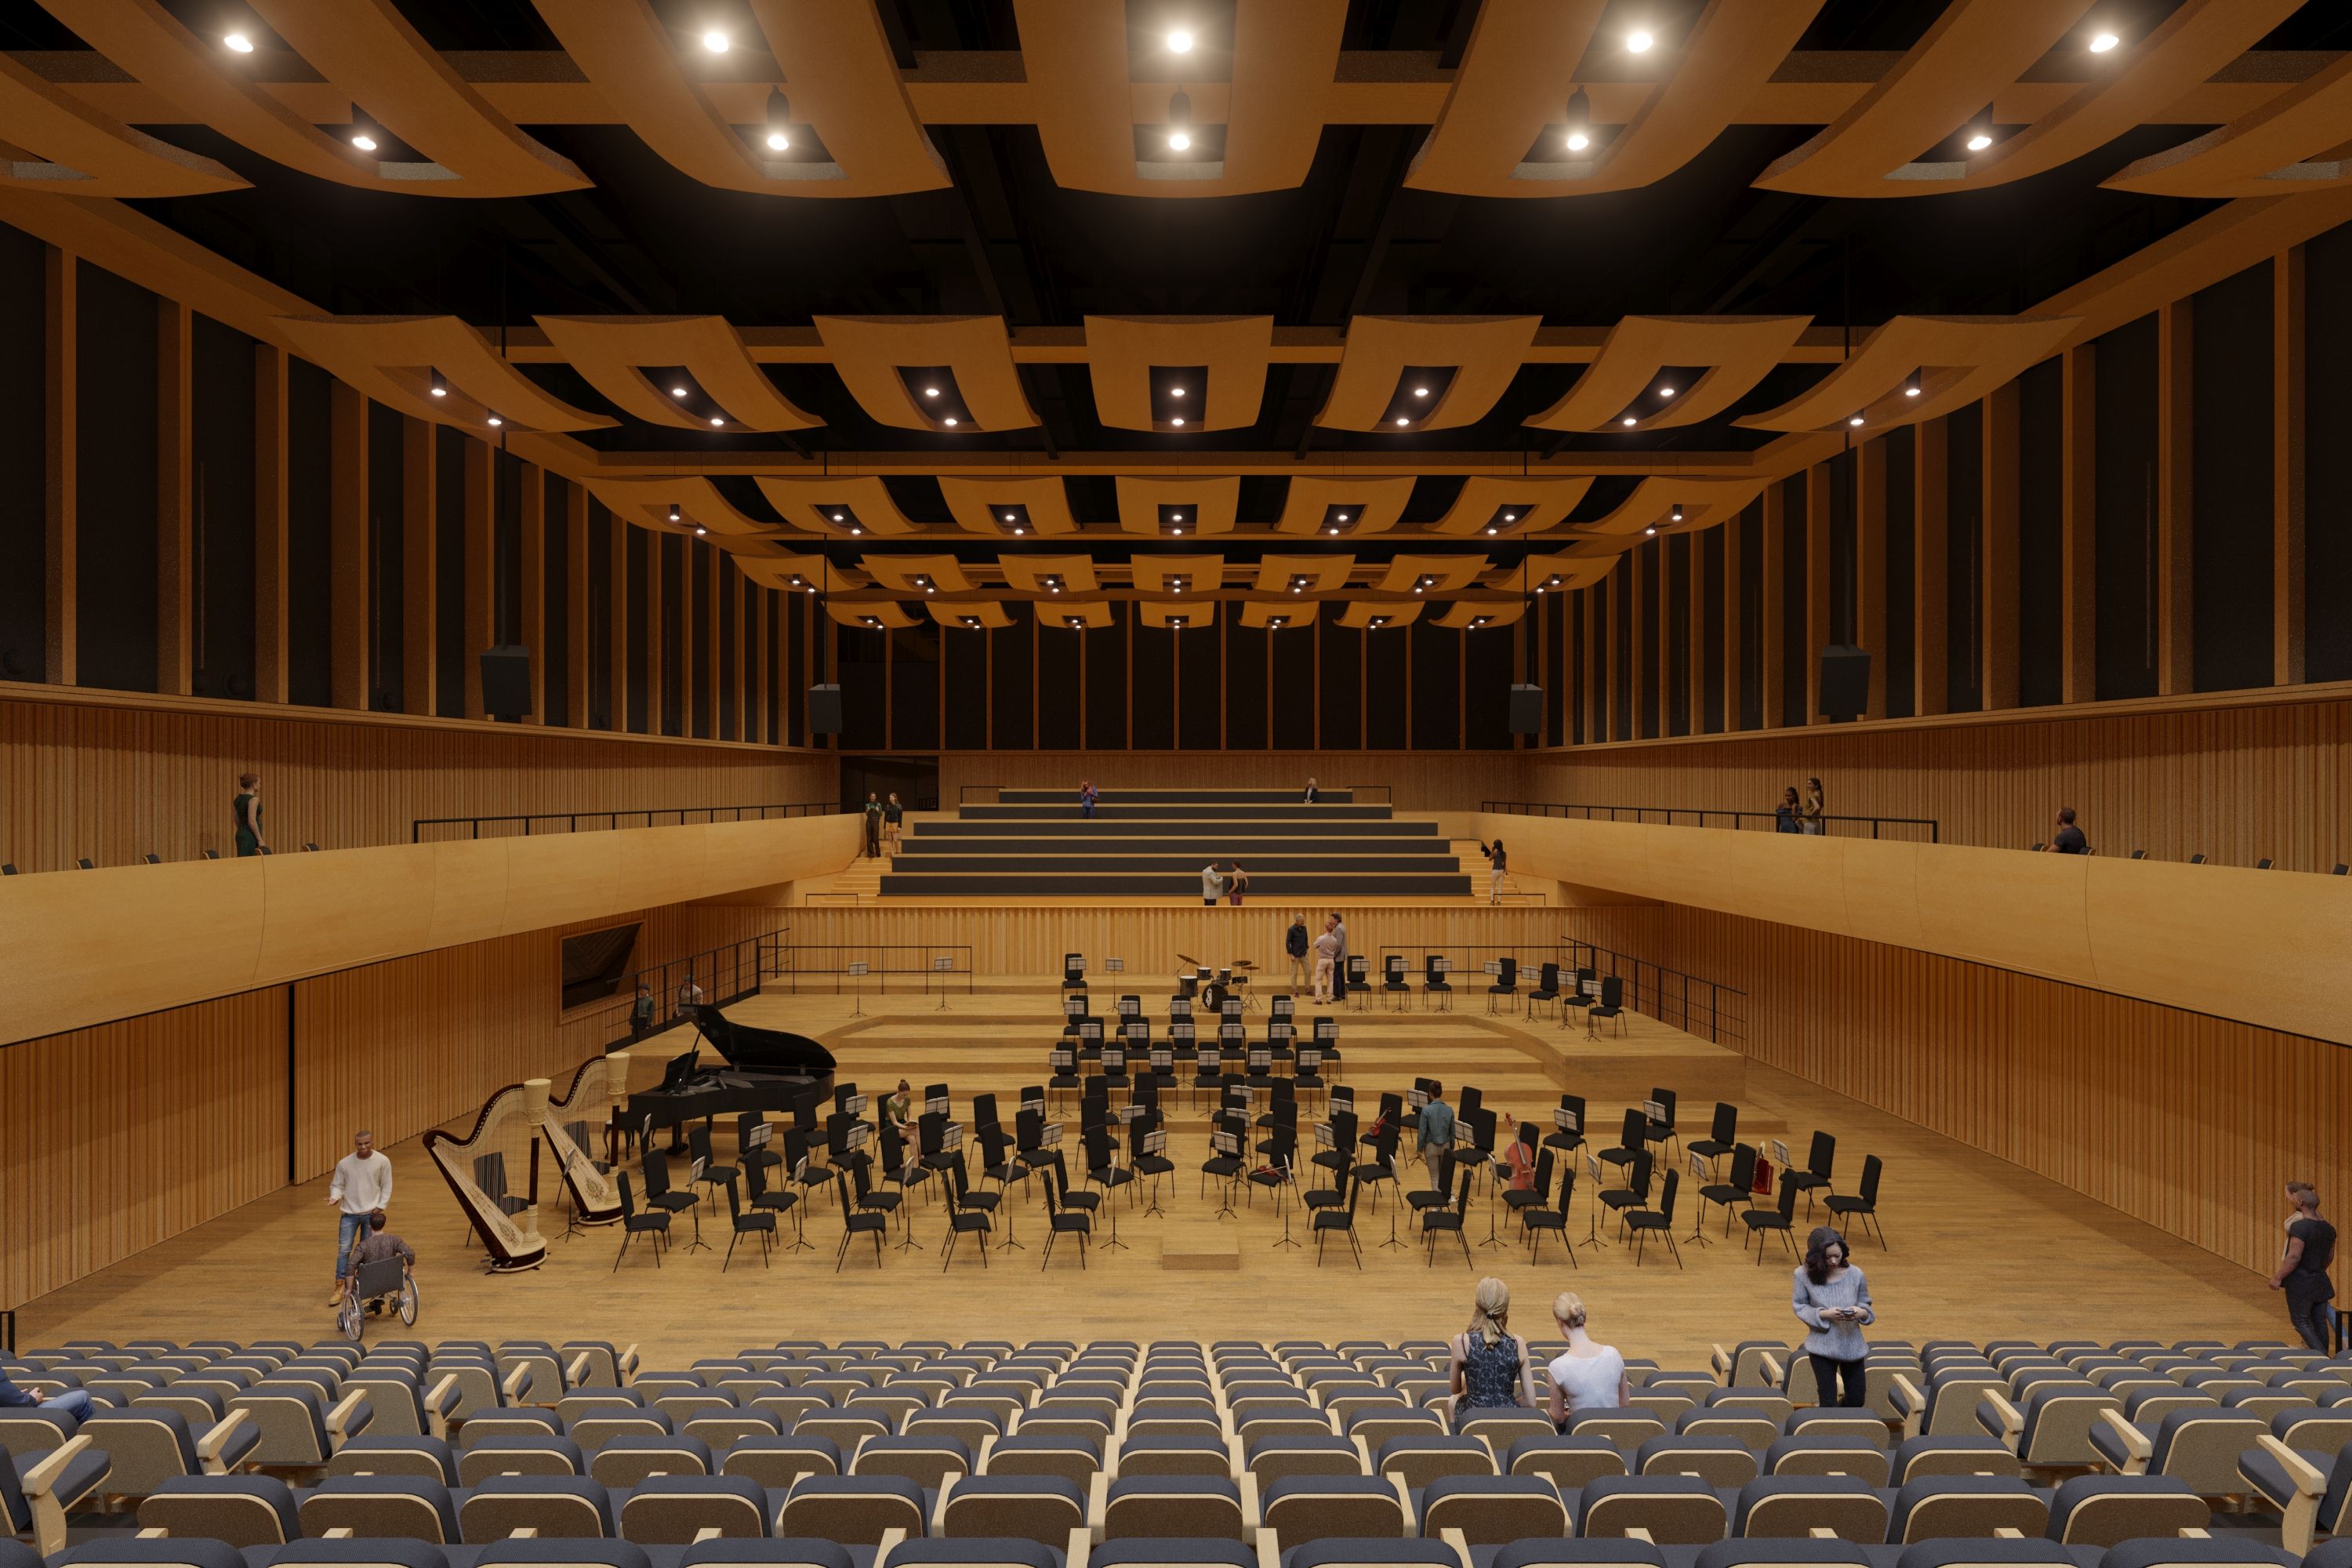 Just in: BBC shows off new London concert hall